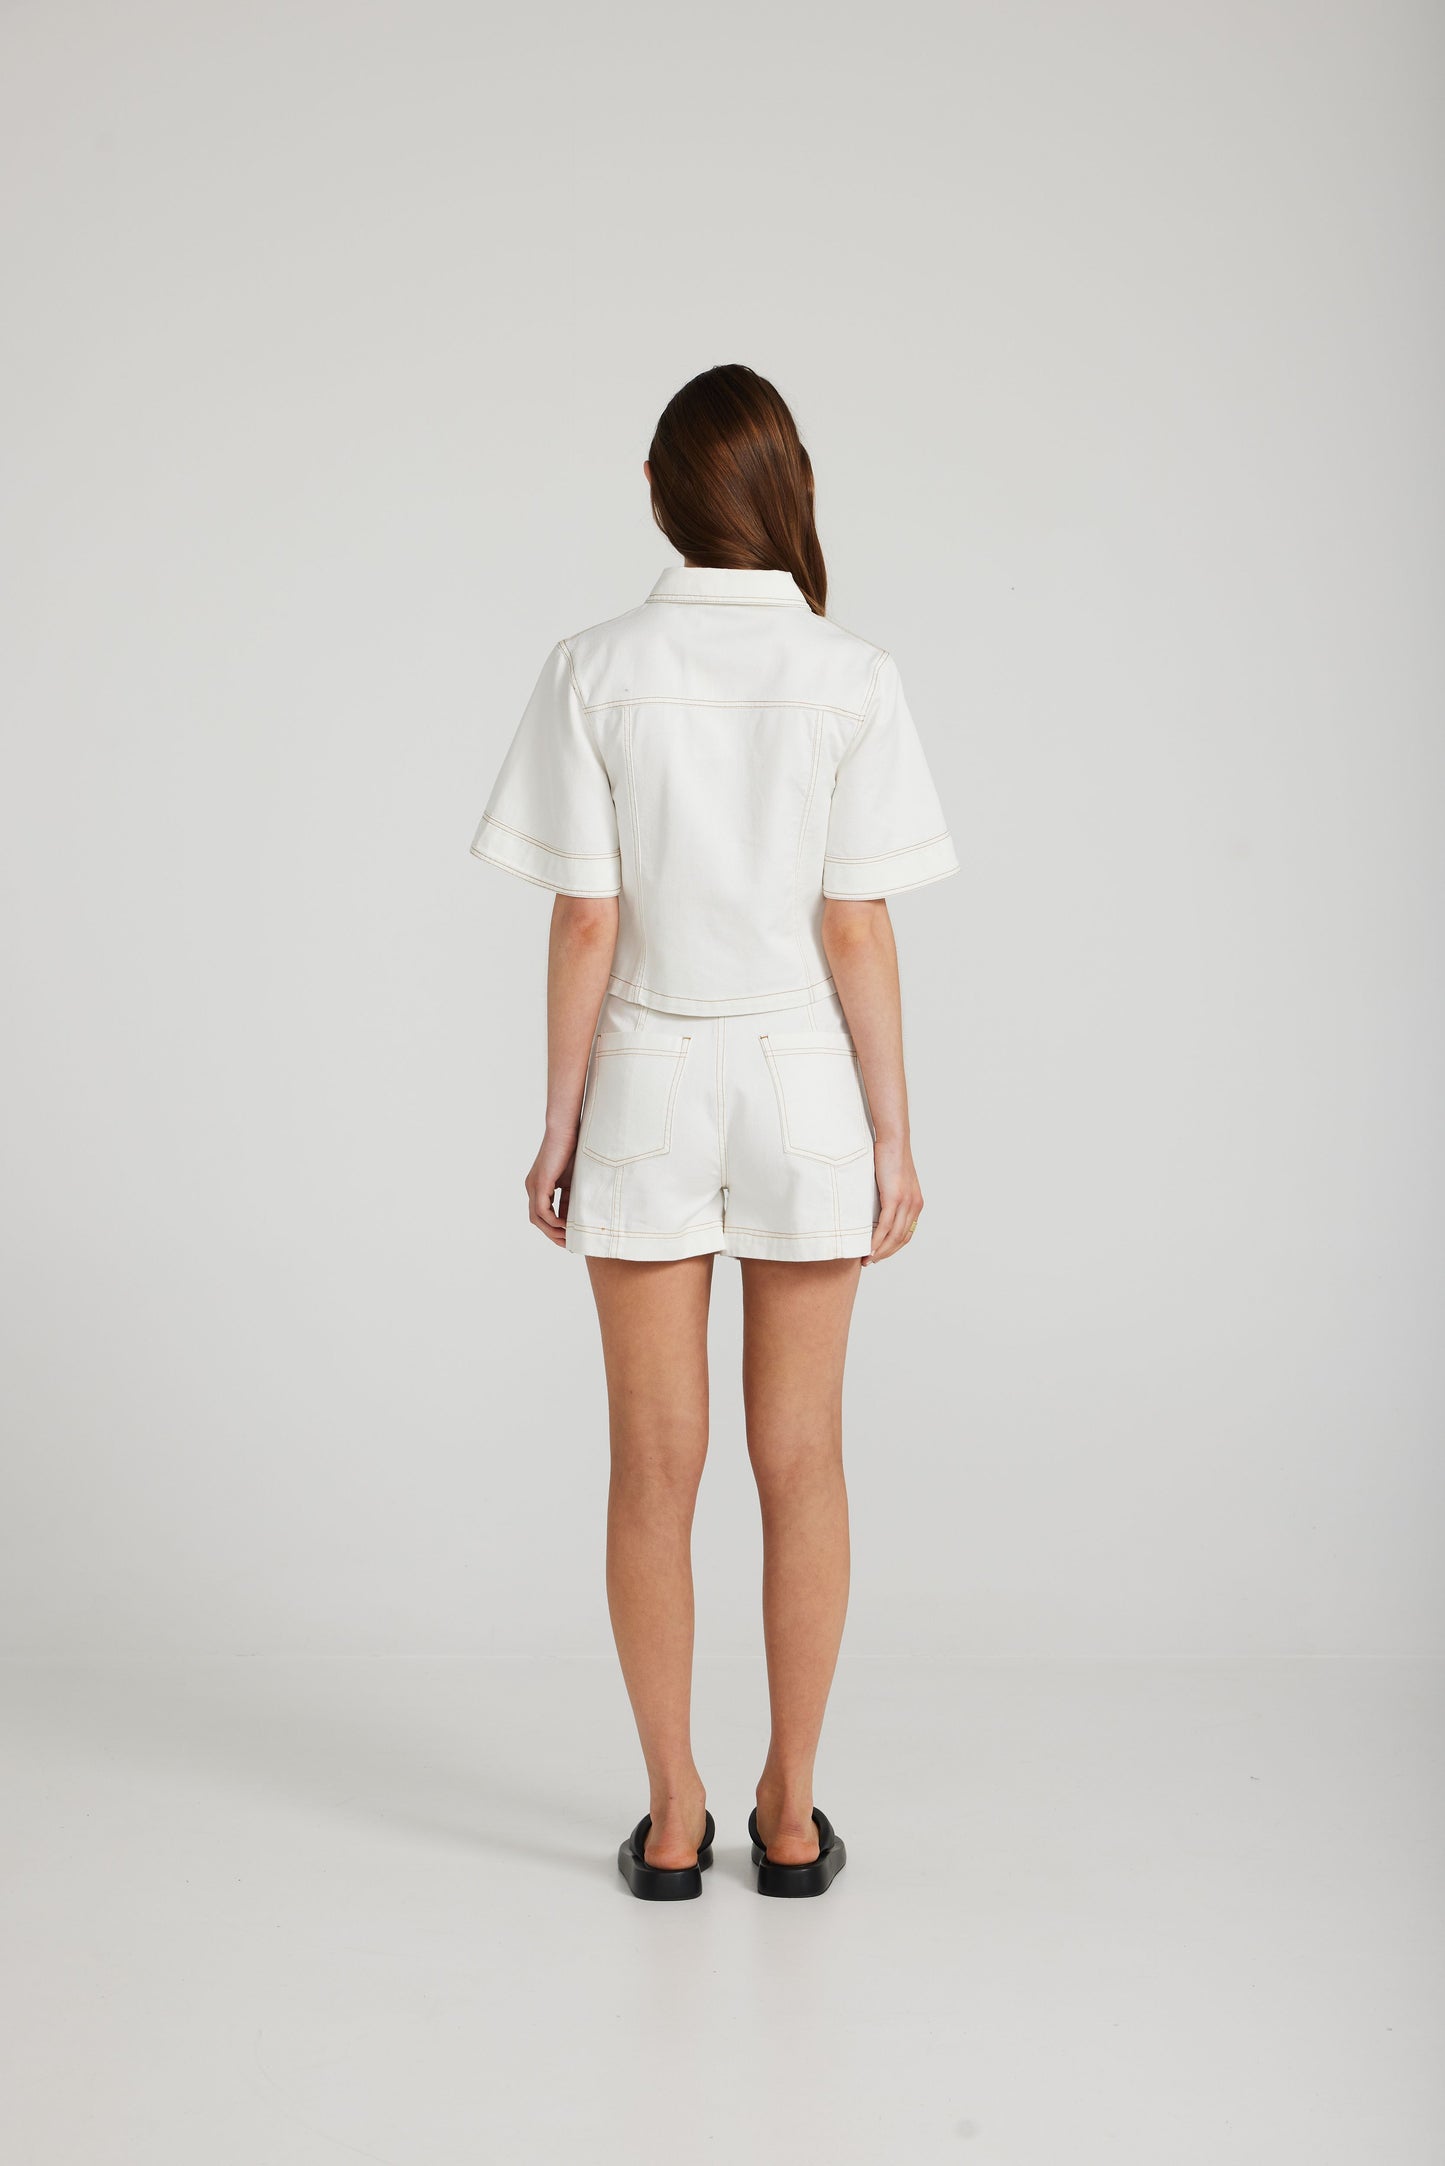 Defender Top in White Denim by Daisy Says